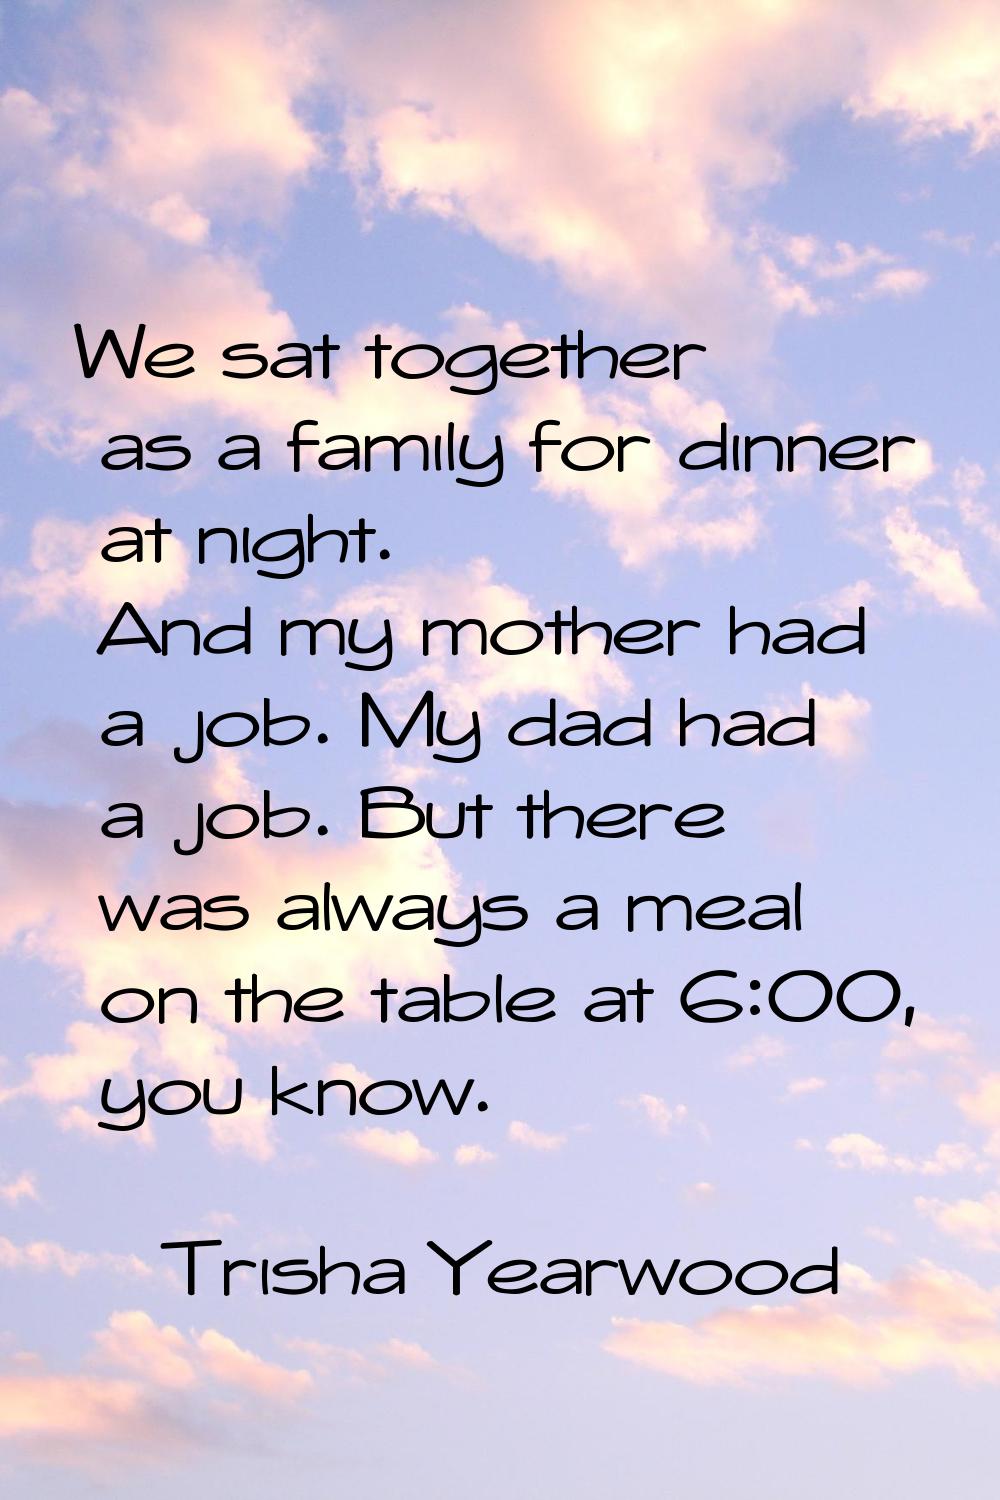 We sat together as a family for dinner at night. And my mother had a job. My dad had a job. But the